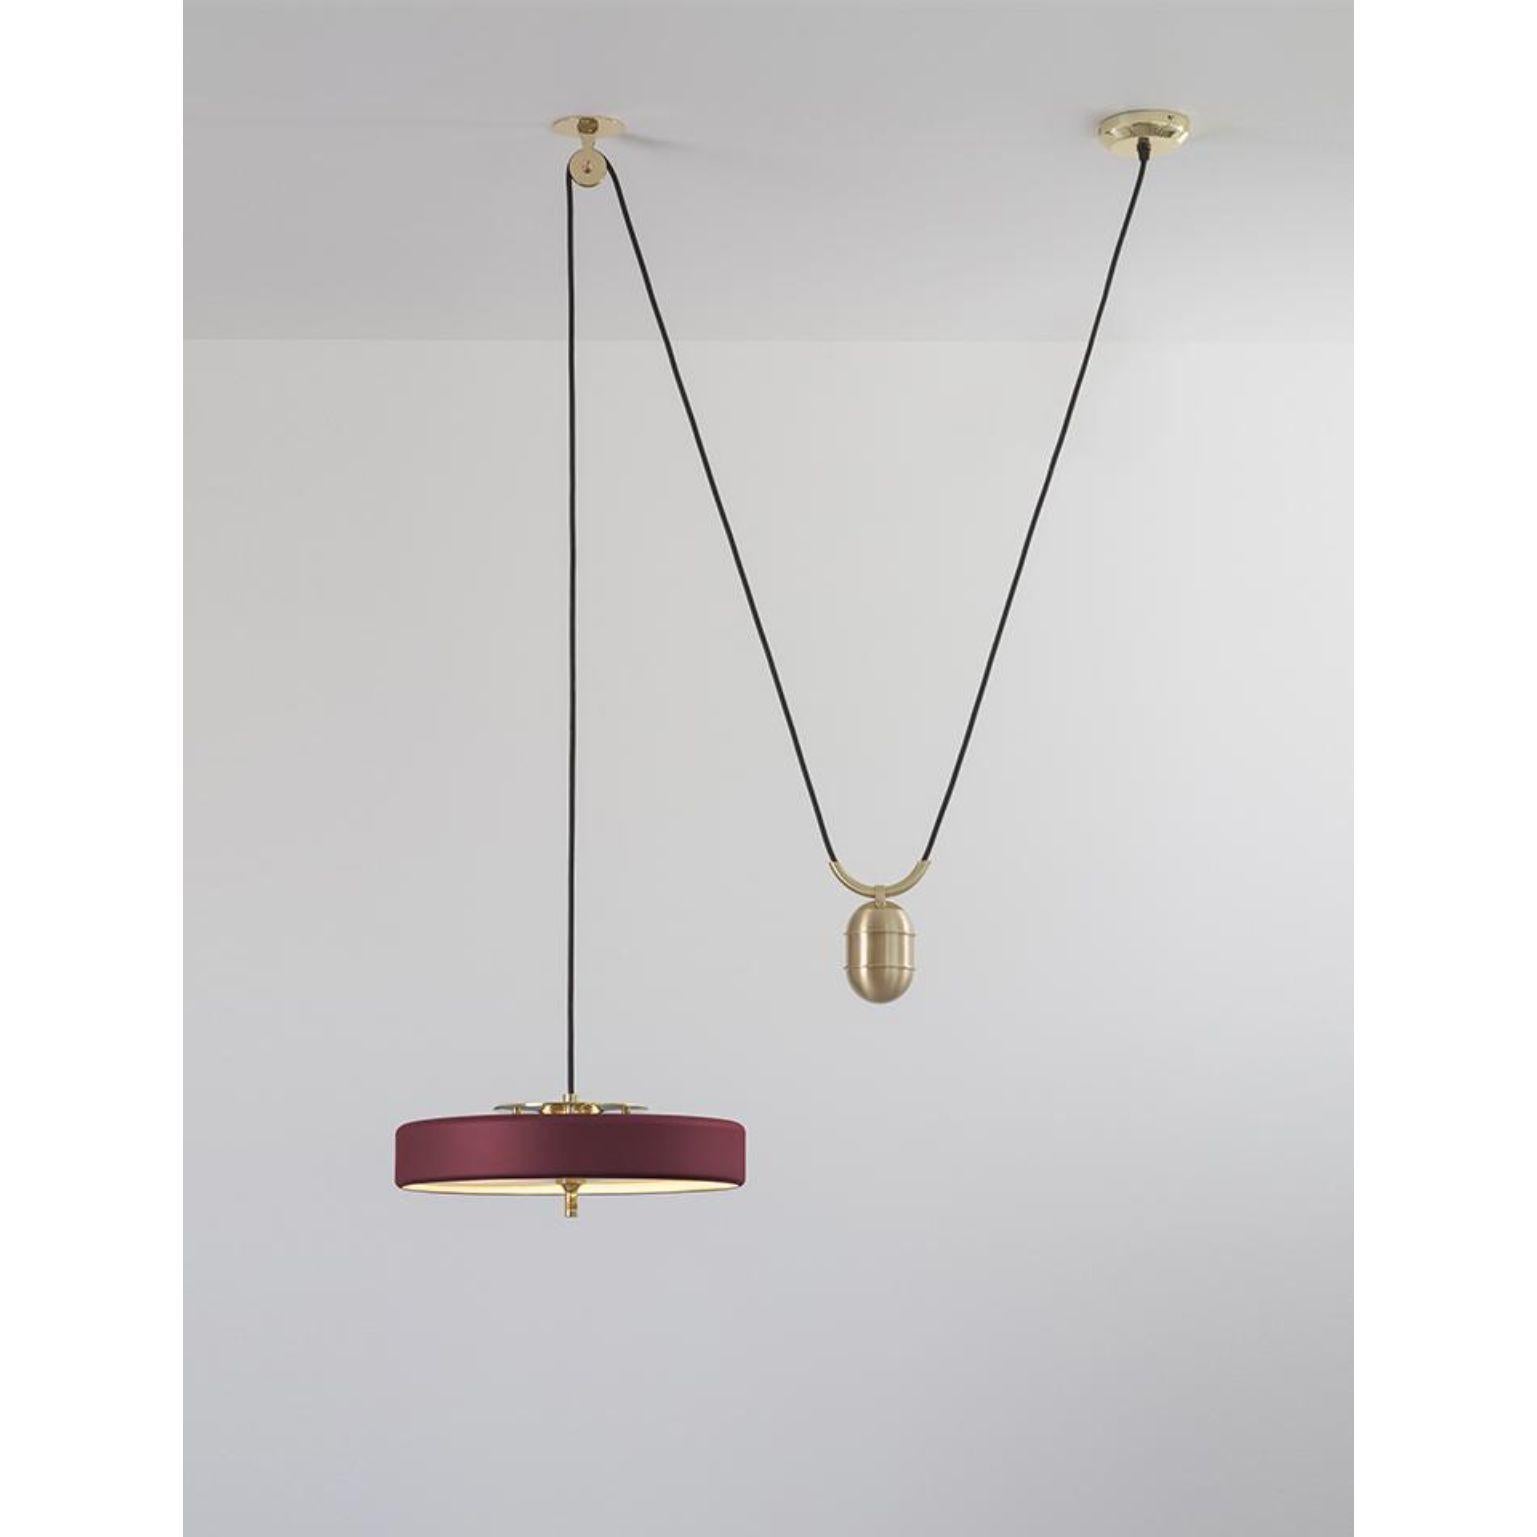 Revolve rise and fall pendant light - polished brass - Oxblood by Bert Frank
Dimensions: 30 x 35 x 11 cm, small lamp: 7.6 cm
Materials: Brass, steel

Also available in brushed brass
When Adam Yeats and Robbie Llewellyn founded Bert Frank in